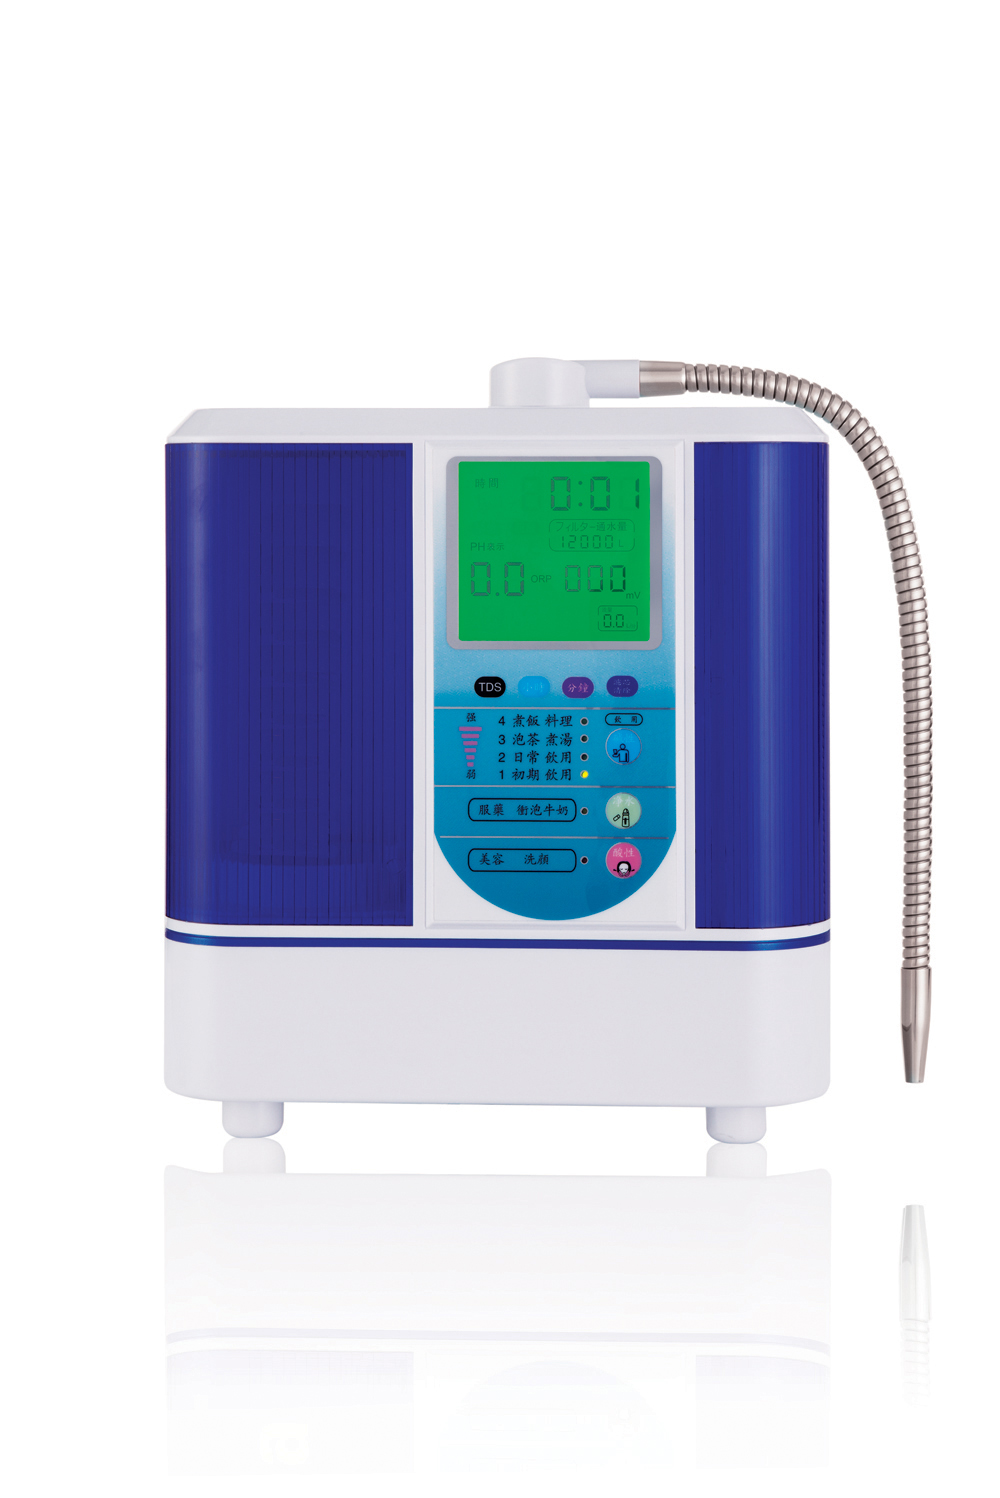 NEW Advanced Alkaline Water Ionizer Water FilterJM-600 WATER FILTER with LCD screen